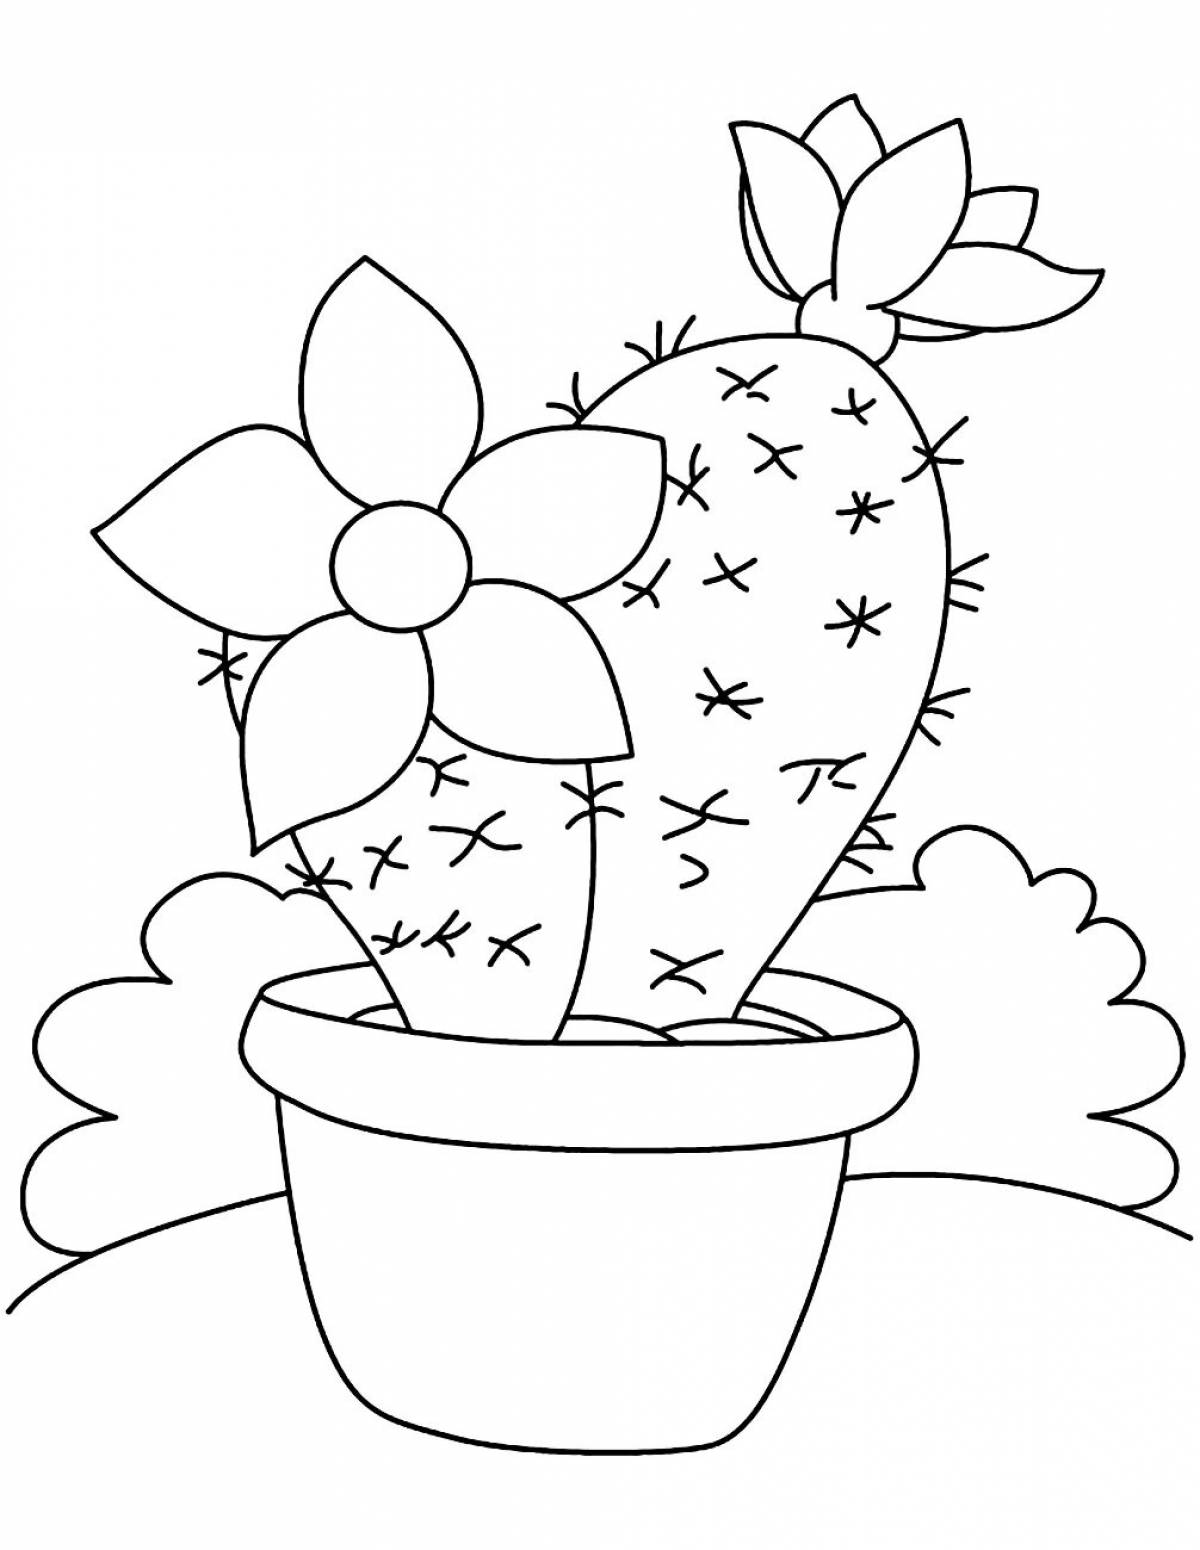 Coloring book ecstatic houseplants for children 6-7 years old